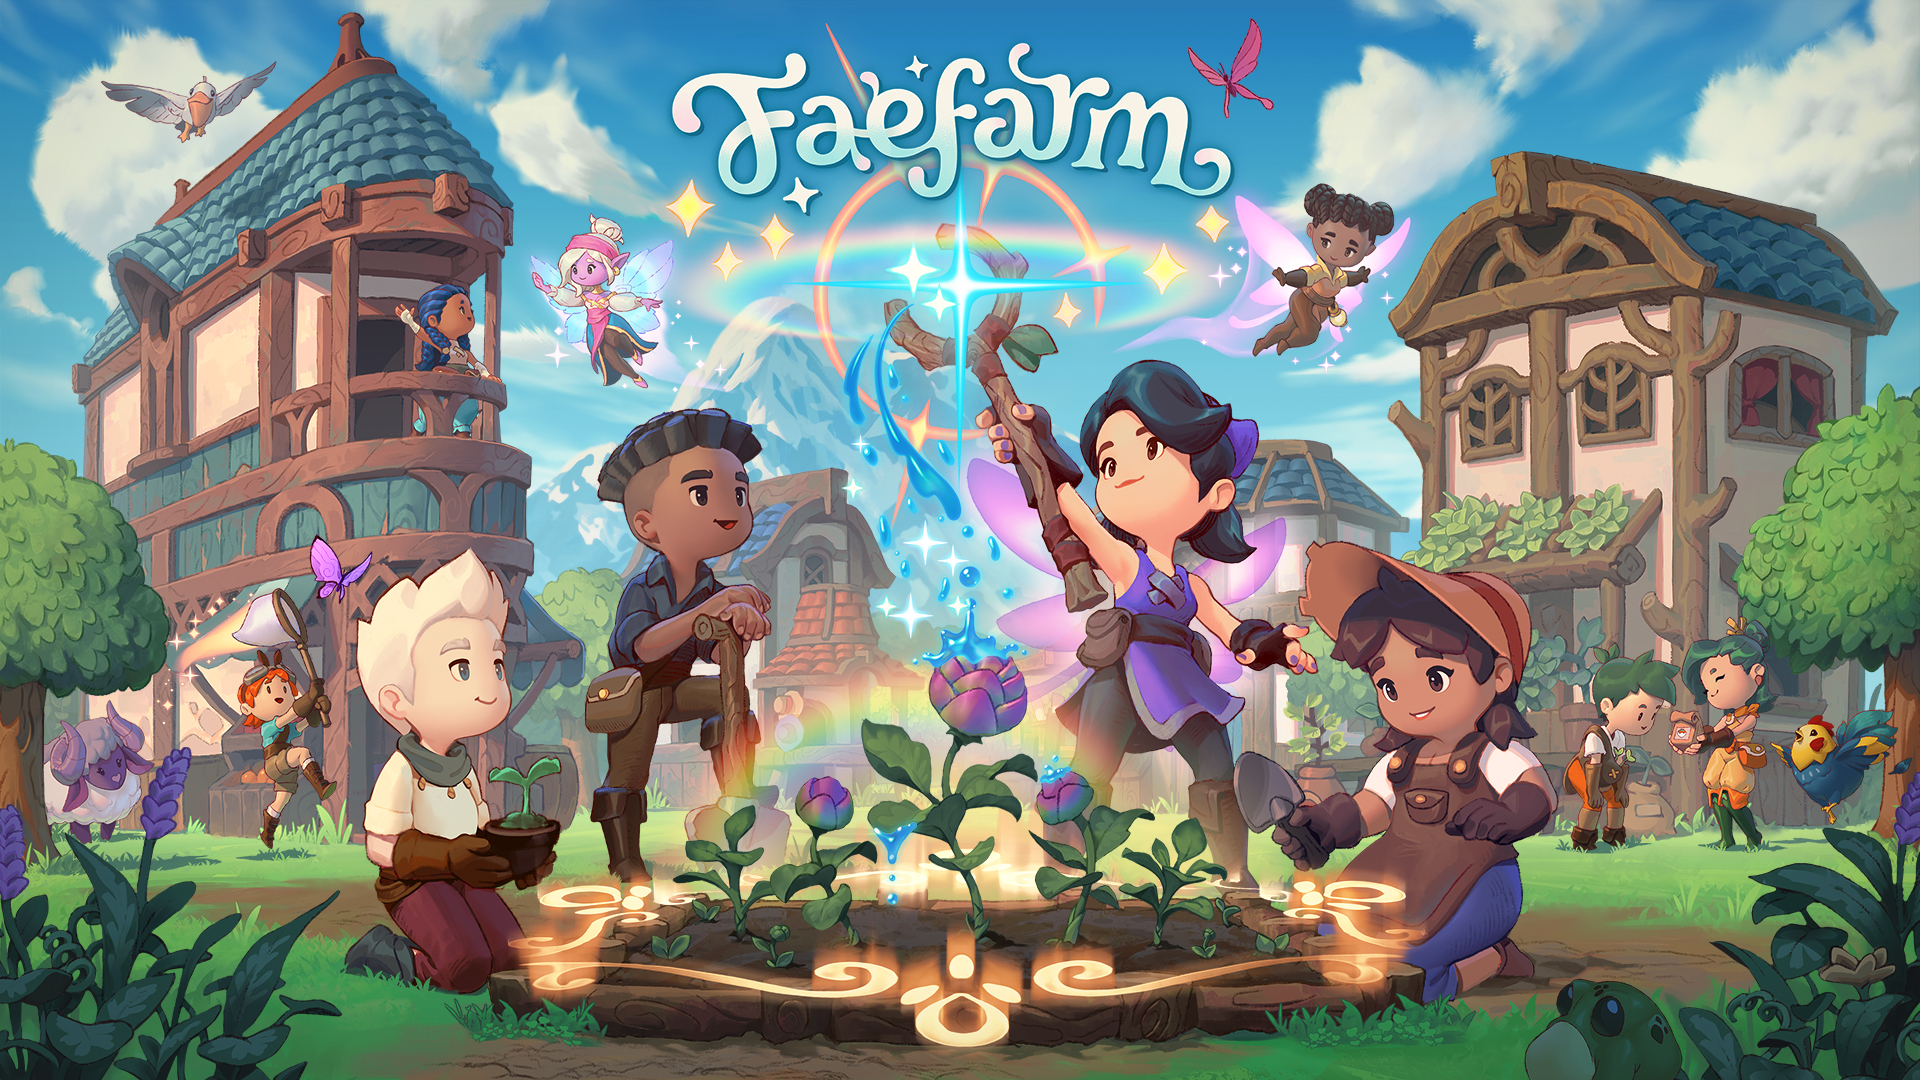 Key art from Fae Farm, showing a group of farmers bringing a flower to life using a wooden wand-like staff and the prismatic powers of tiny faeries.